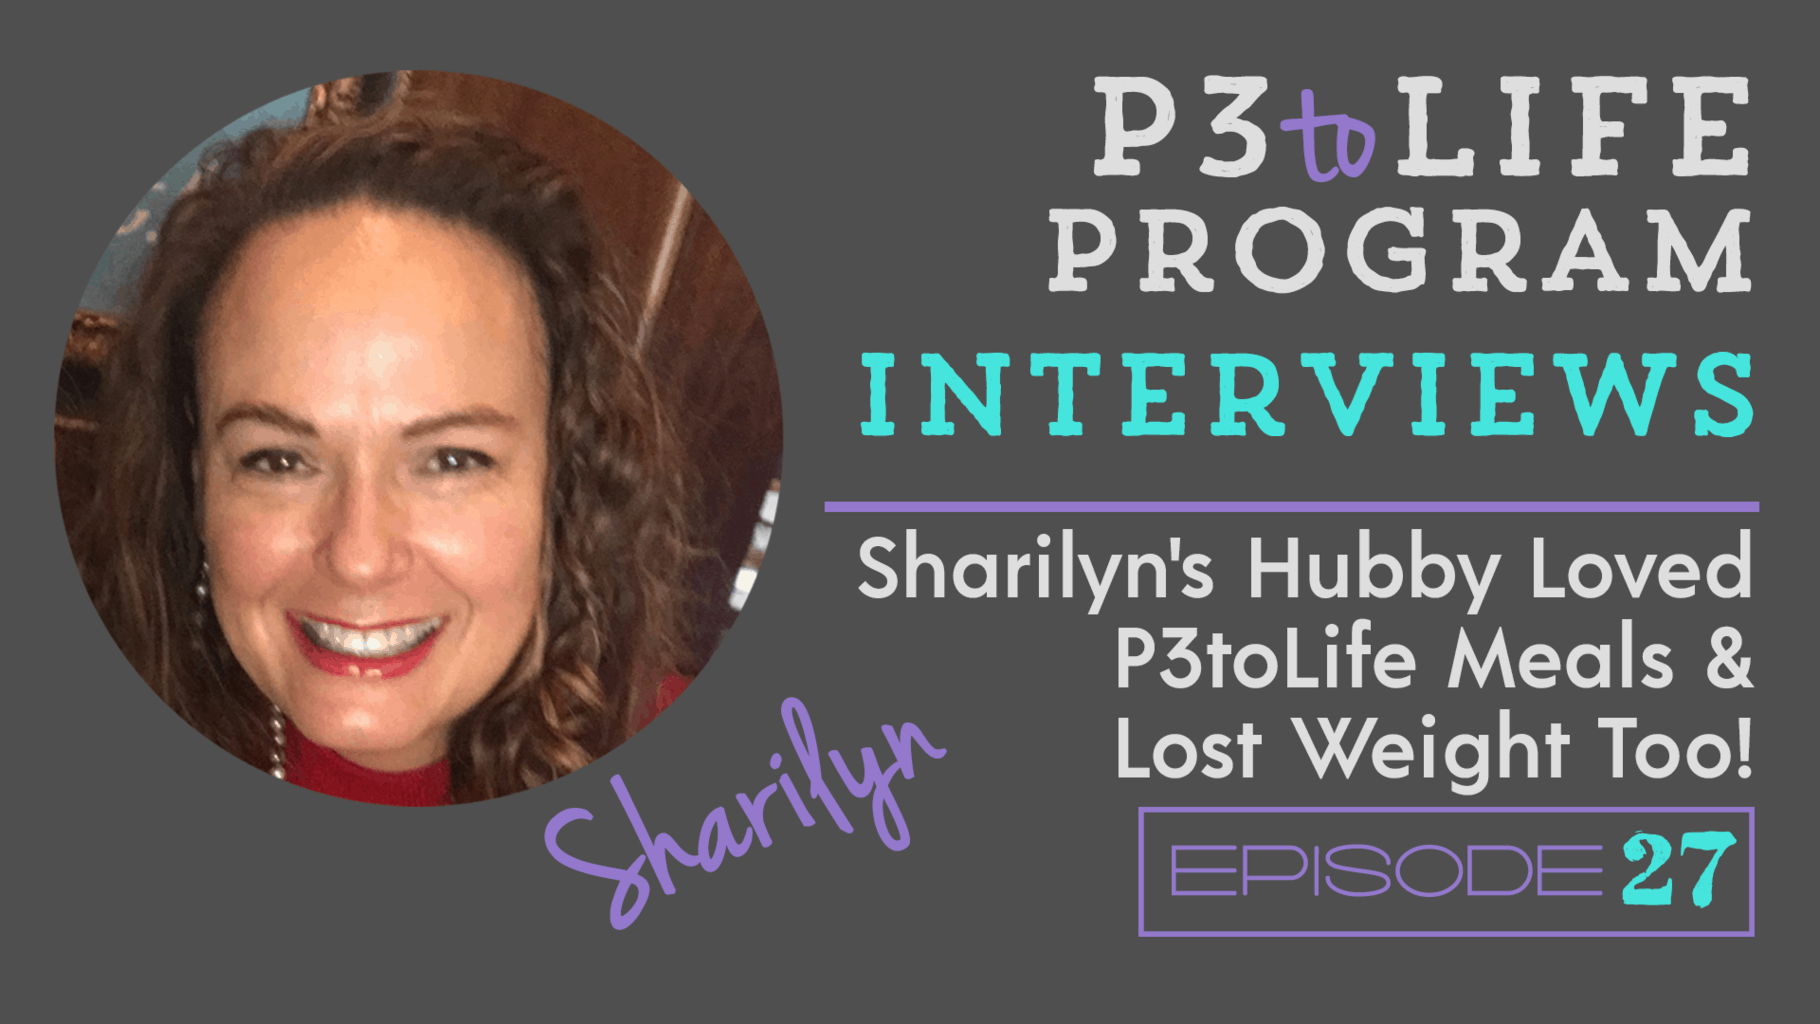 phase-3-meals-hubby-lhusband-oved-lost-weight-with-p3tolife-episode-27-sharilyn